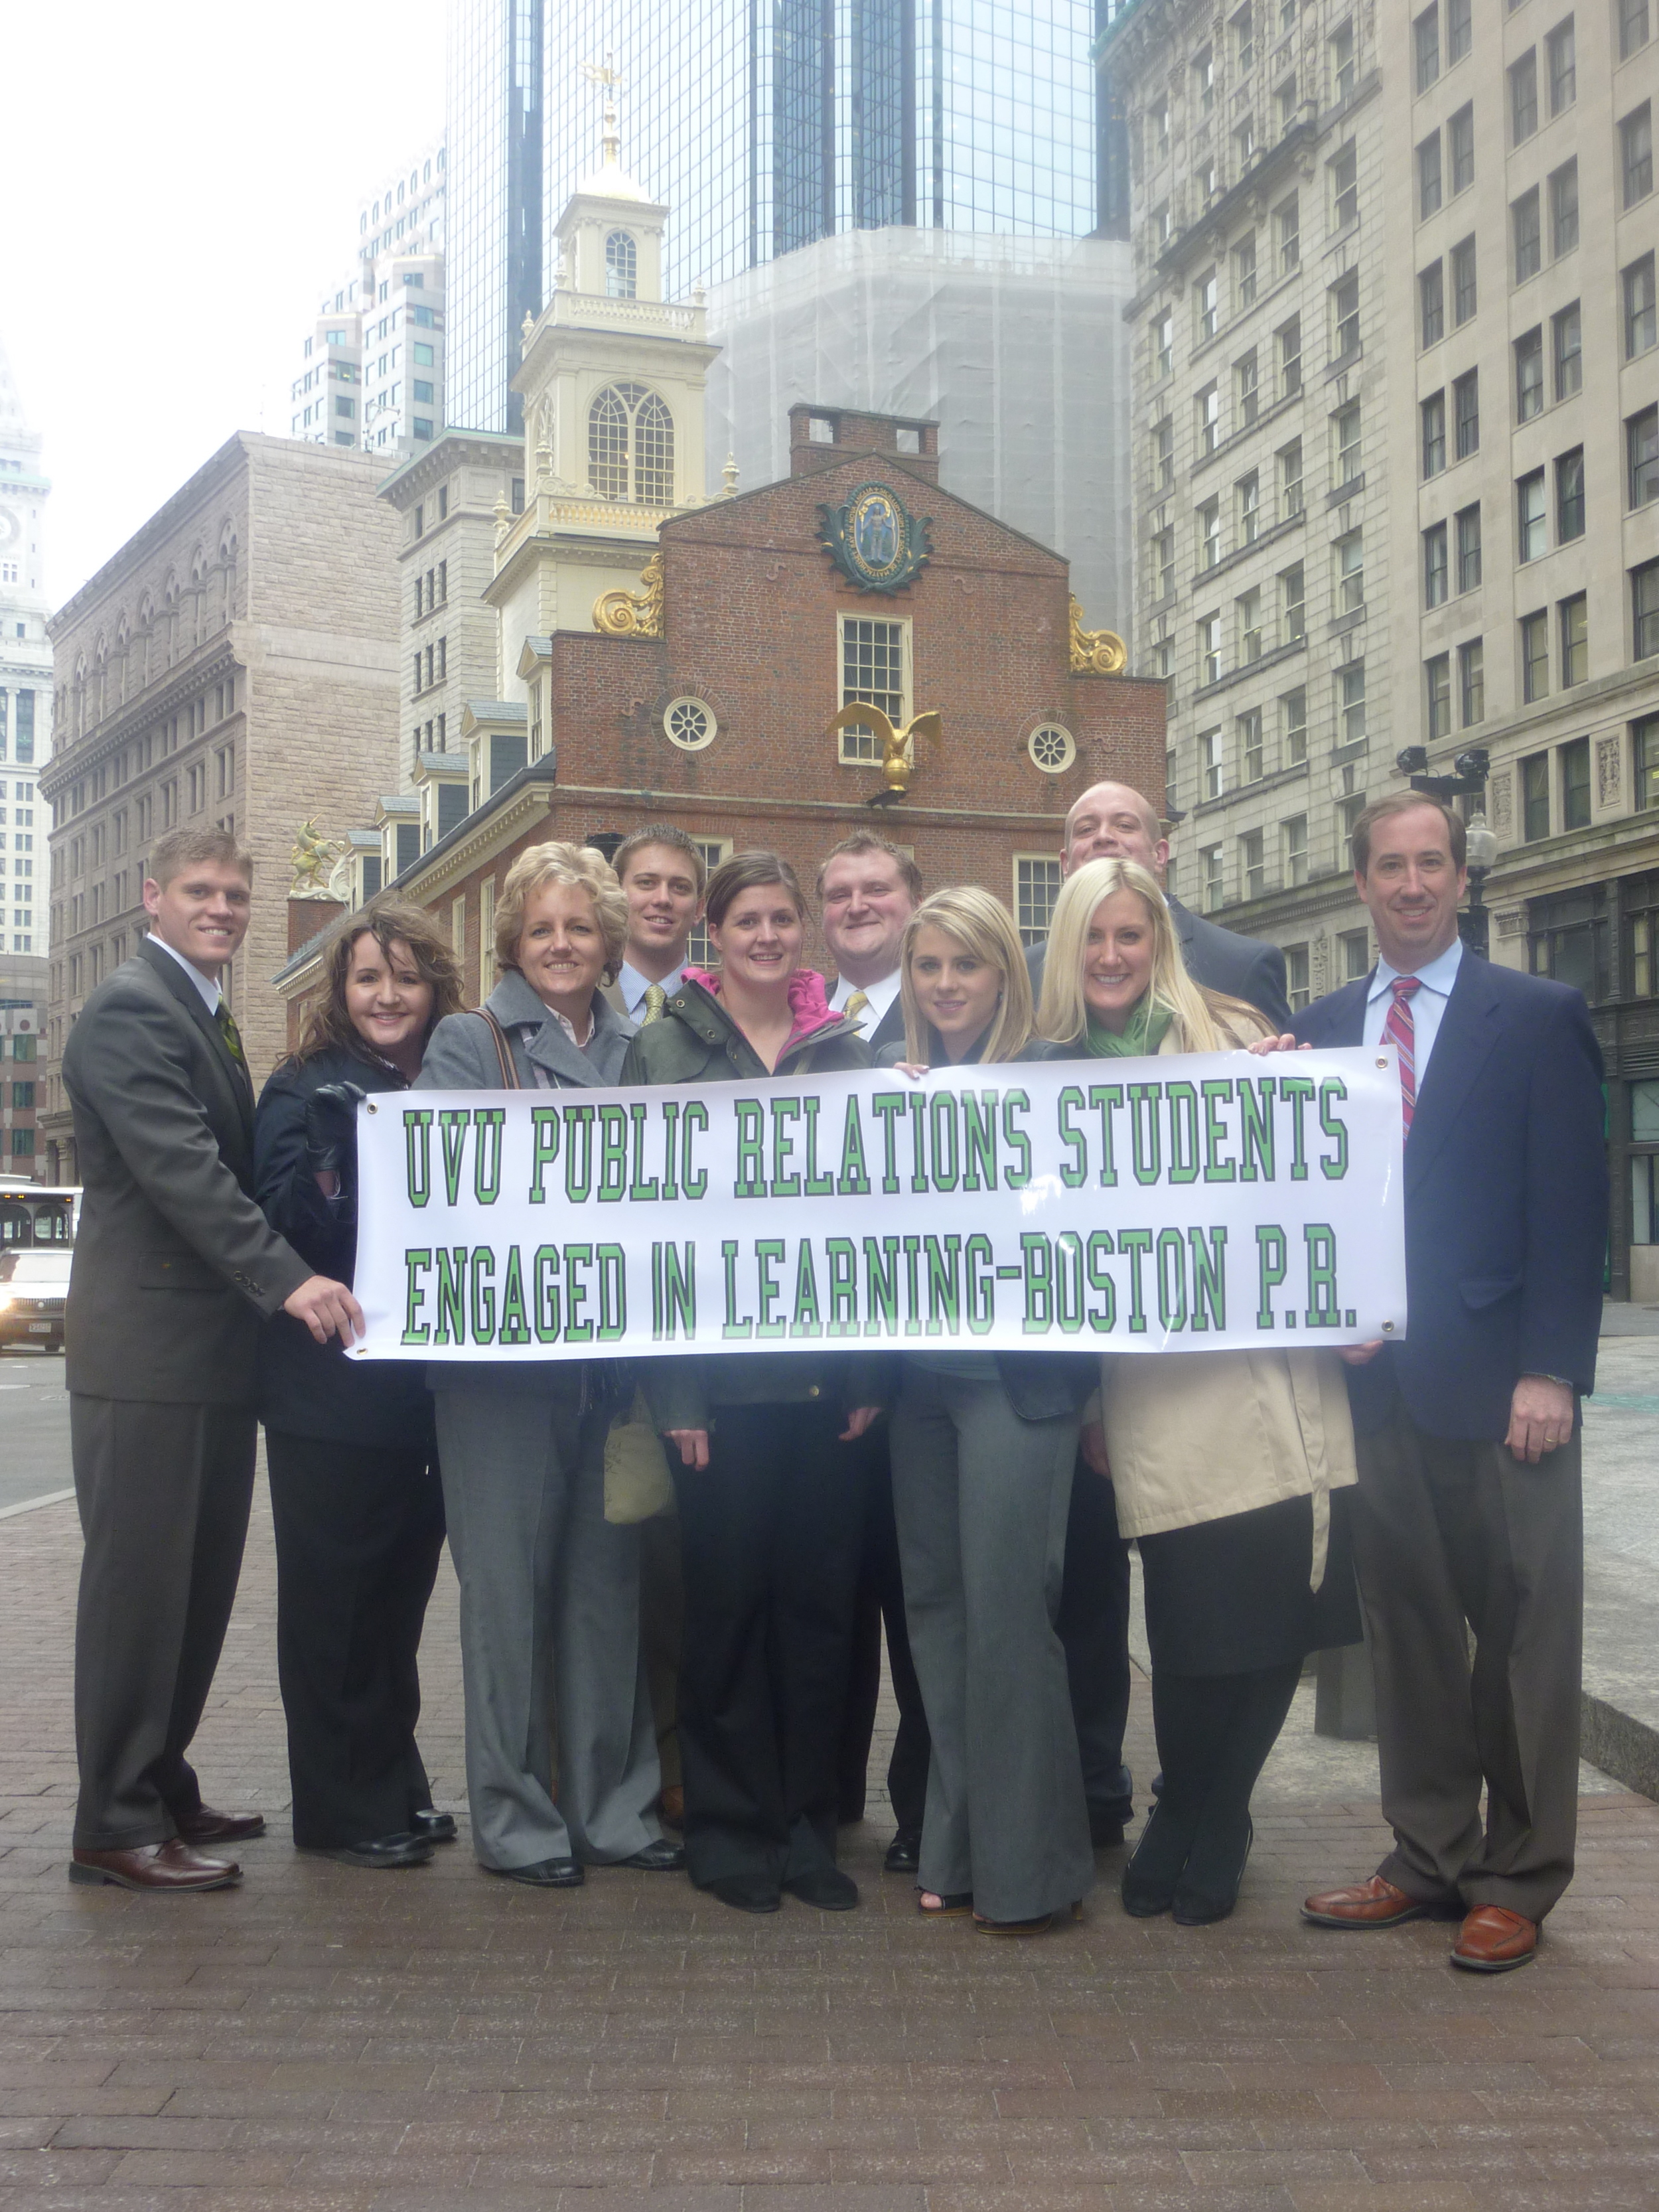 PR students in Boston - downtown Boston with sign.jpg